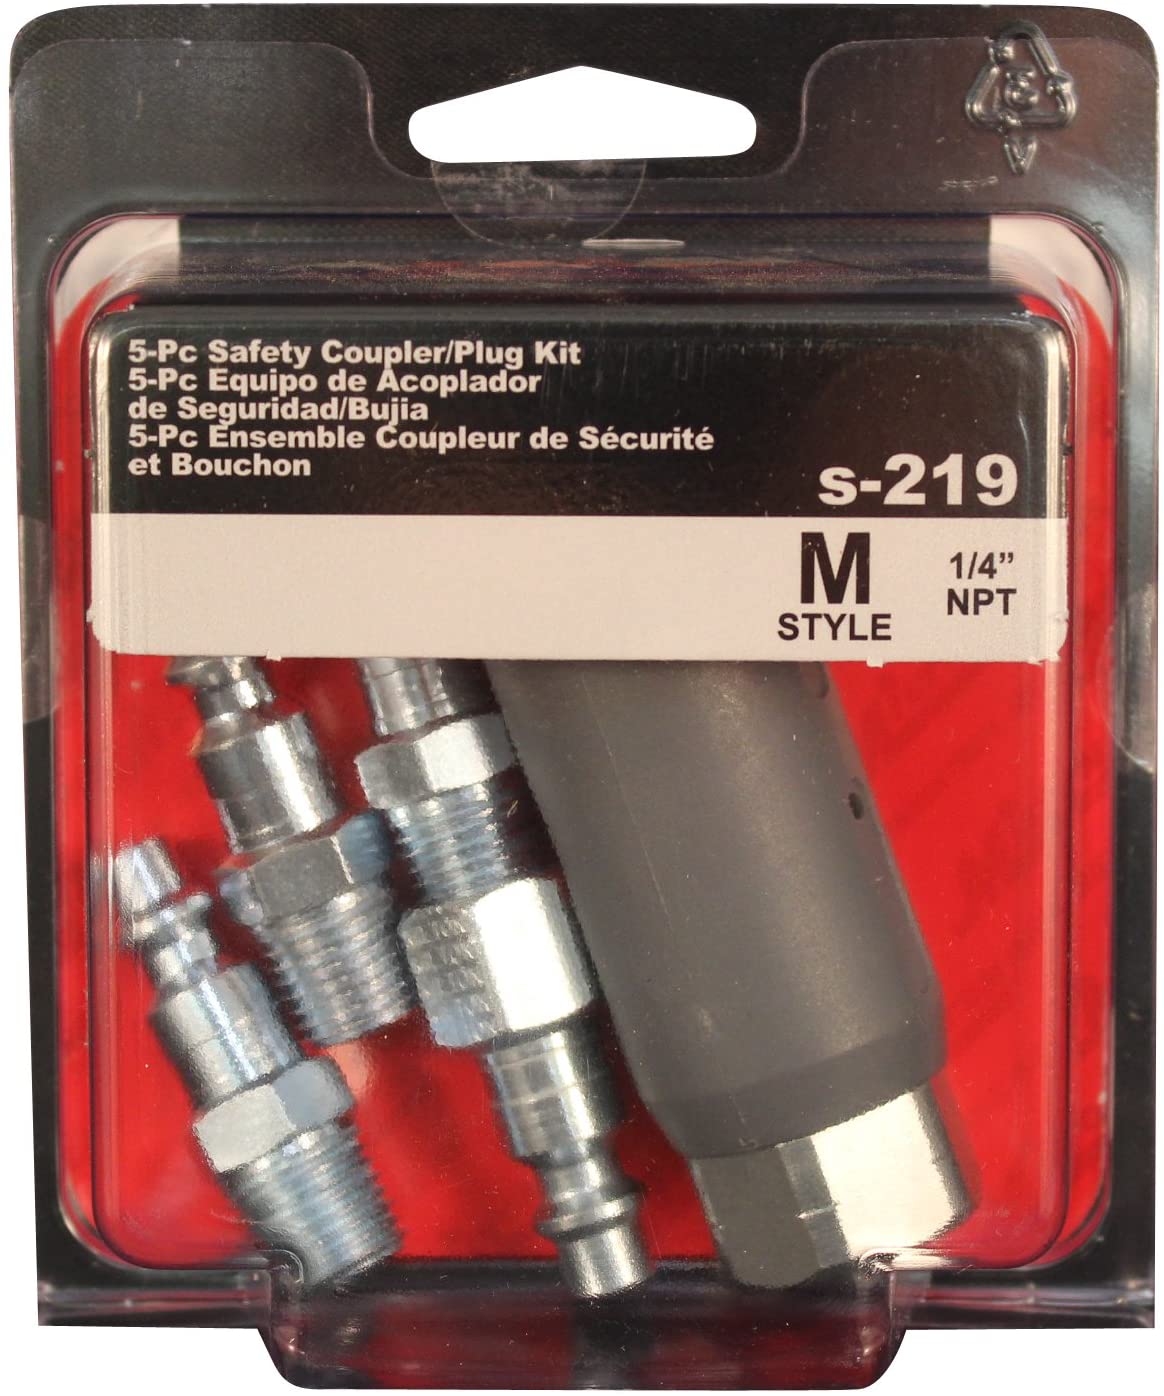 Milton S-219 1/4" M Style Safety Coupler and Plug Kit 5 Pieces Industrial Style